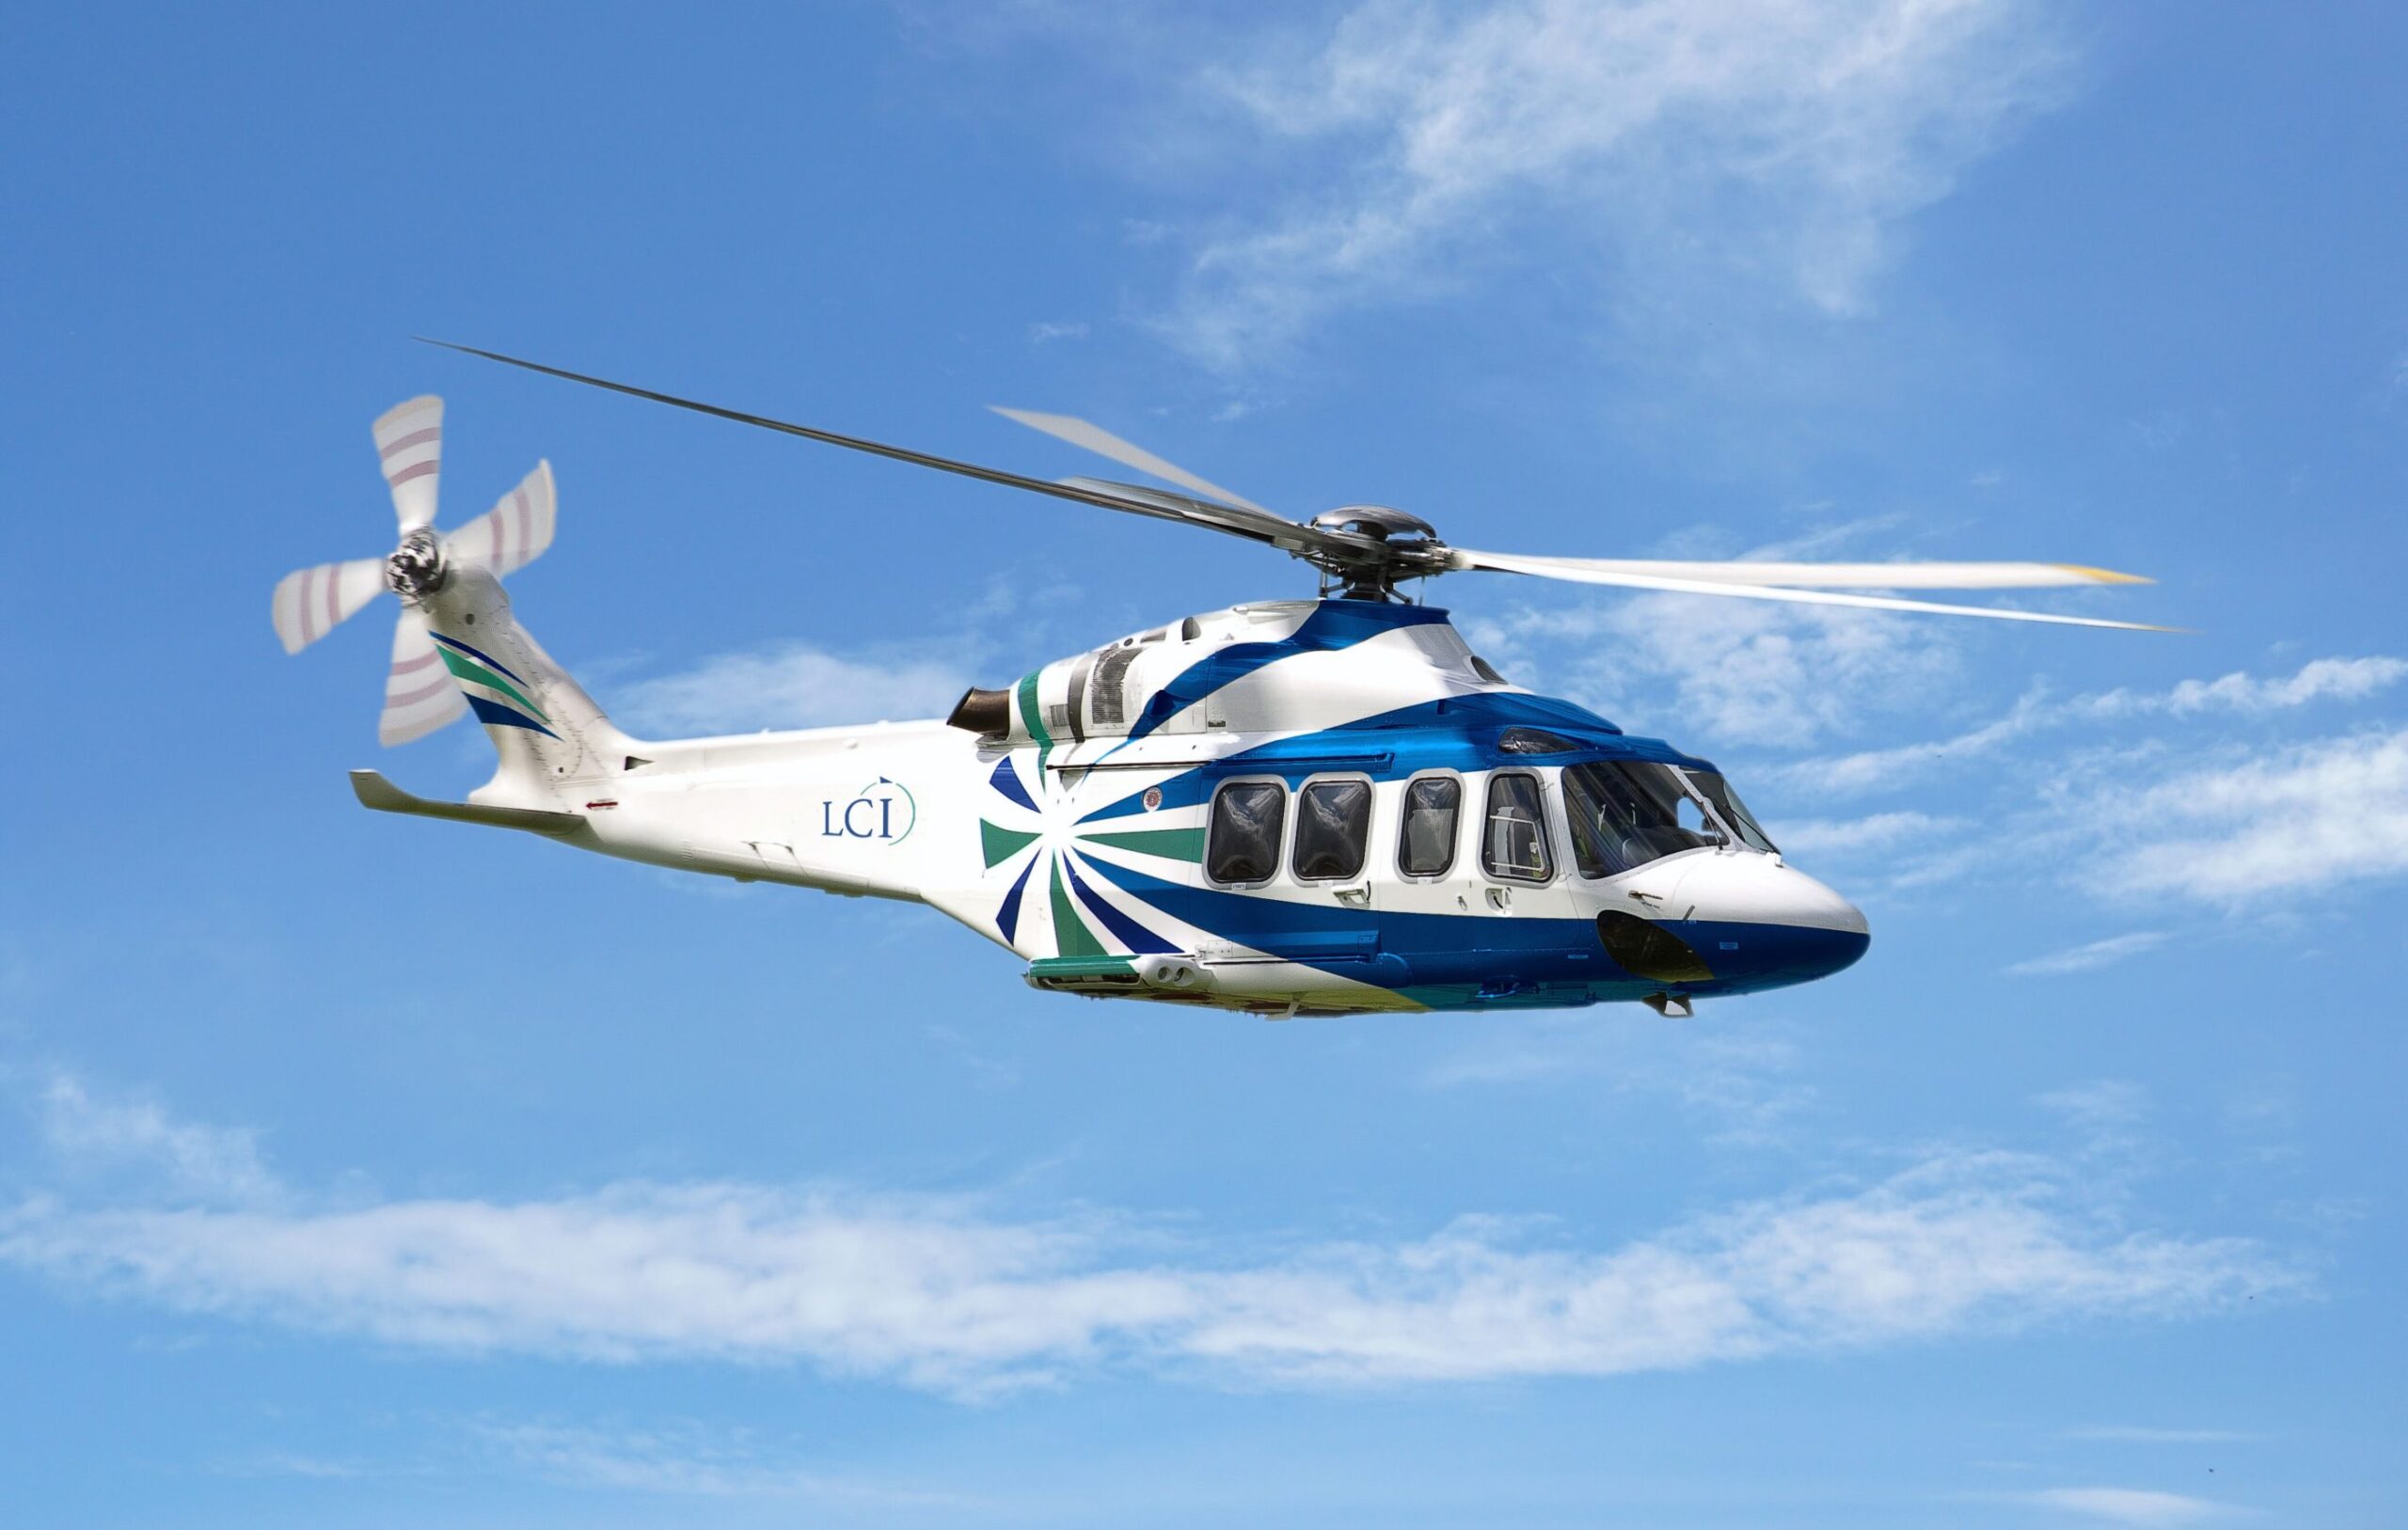 LCI signed agreement for delivery of six helicopters H175 from Airbus